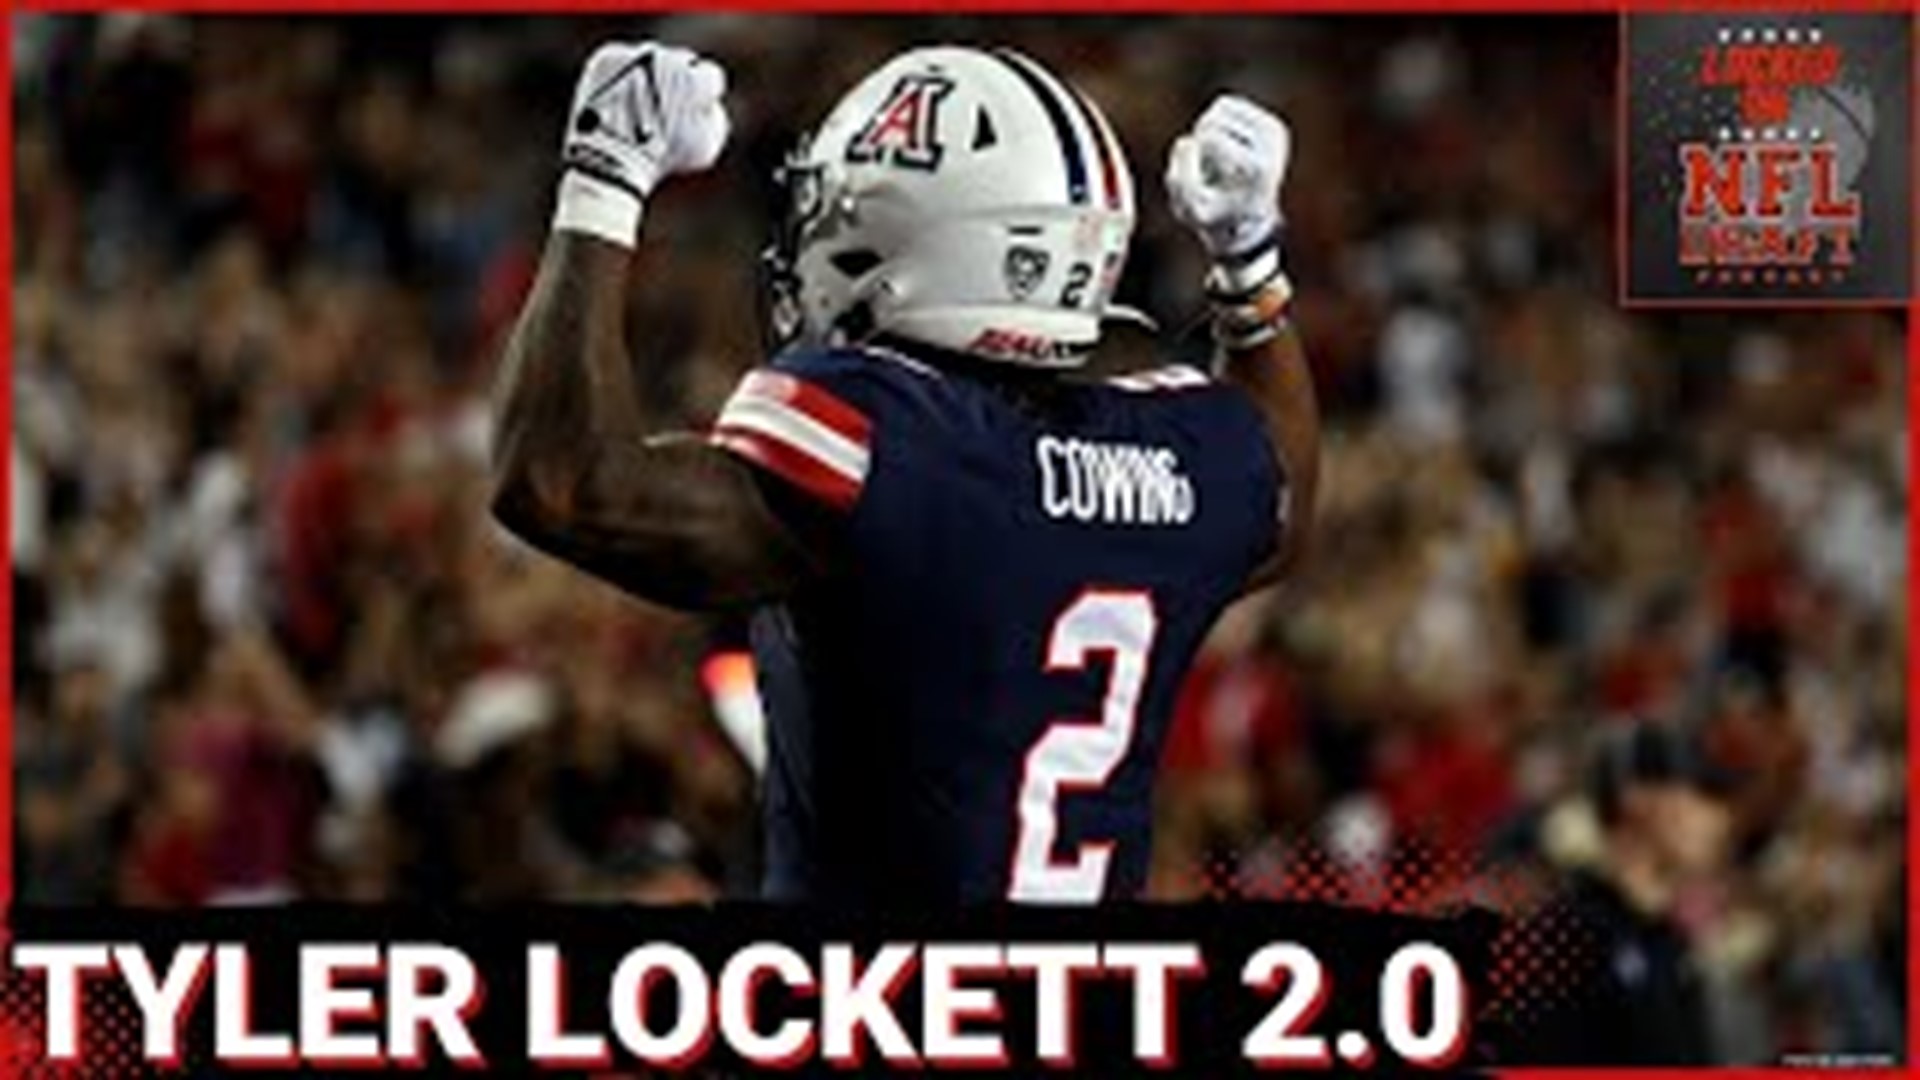 Get to know Arizona Wildcat WR Jacob Cowing as he joins the show with DP and Keith. Cowing discusses fatherhood, NFL draft prep, Senior Bowl, and combine.